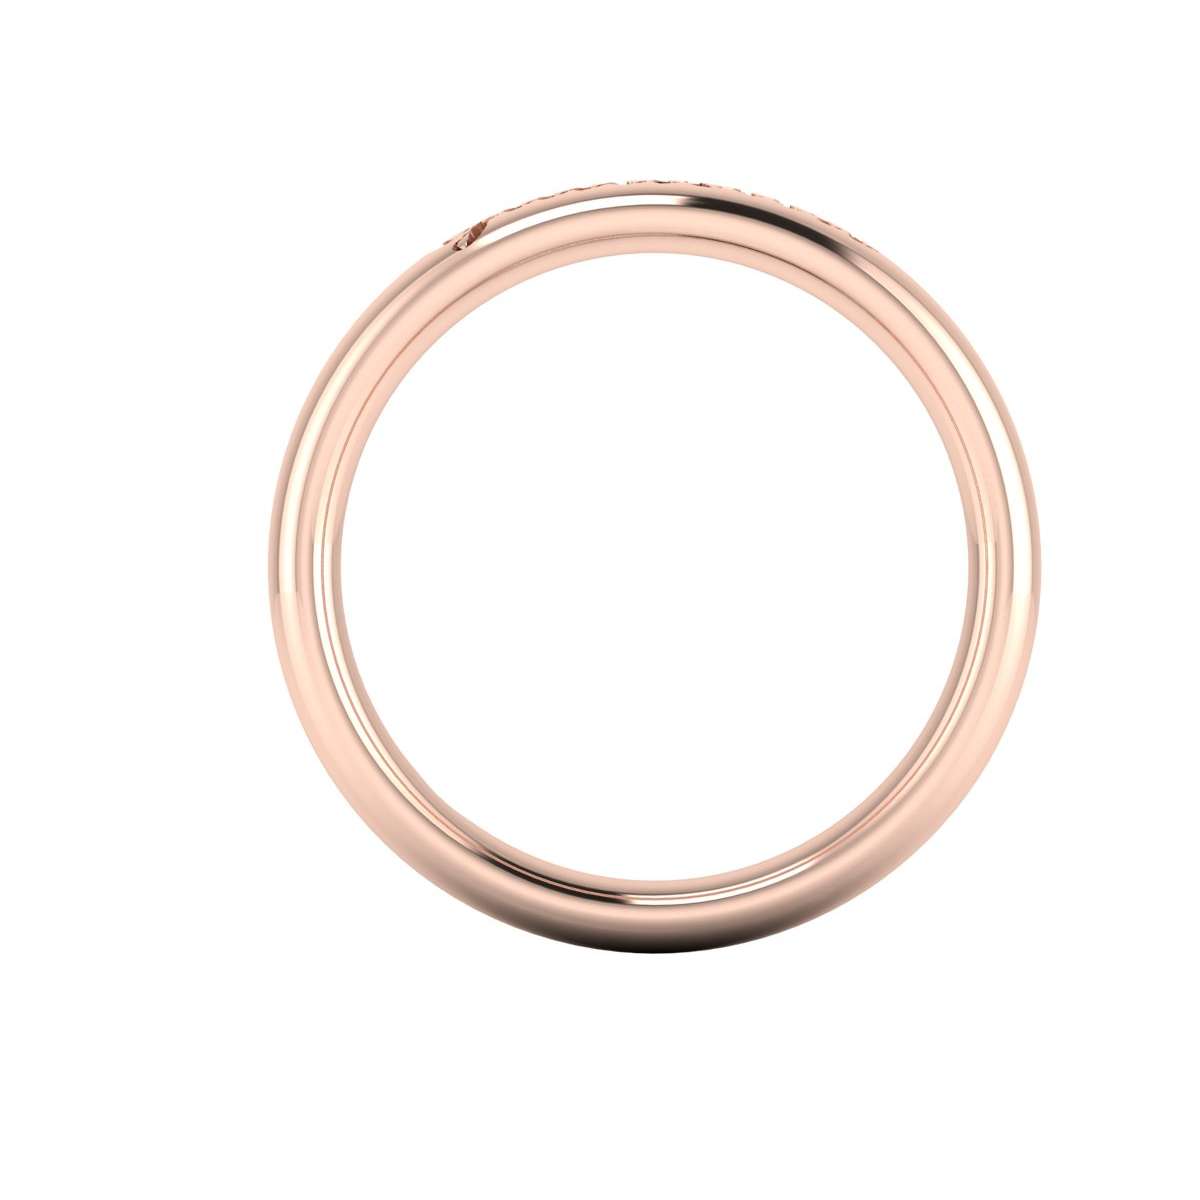 Juliet and Romeo wedding ring in 18KT rose gold with externally engraved name